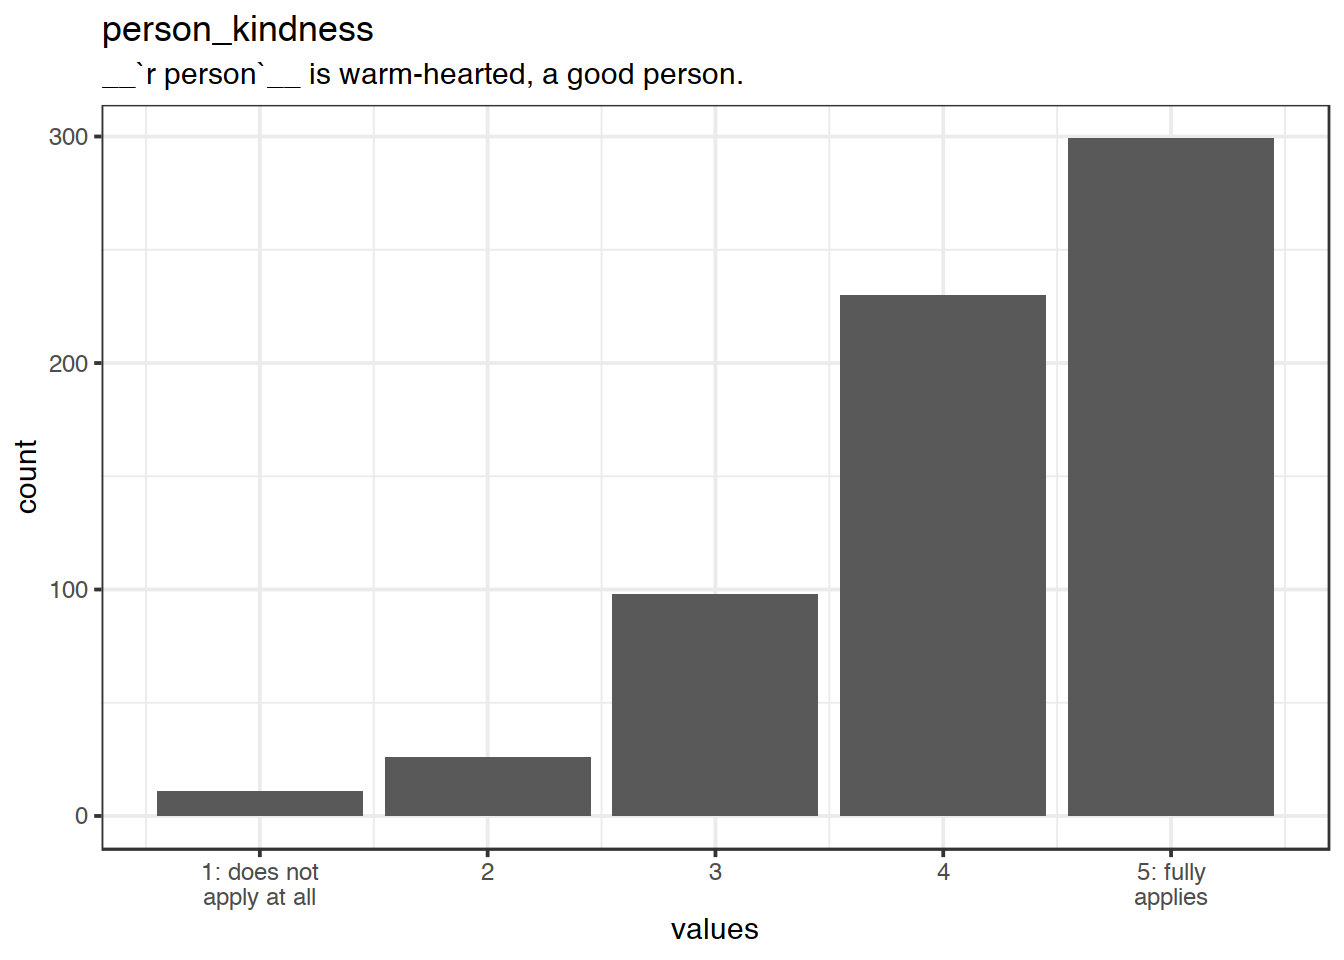 Distribution of values for person_kindness